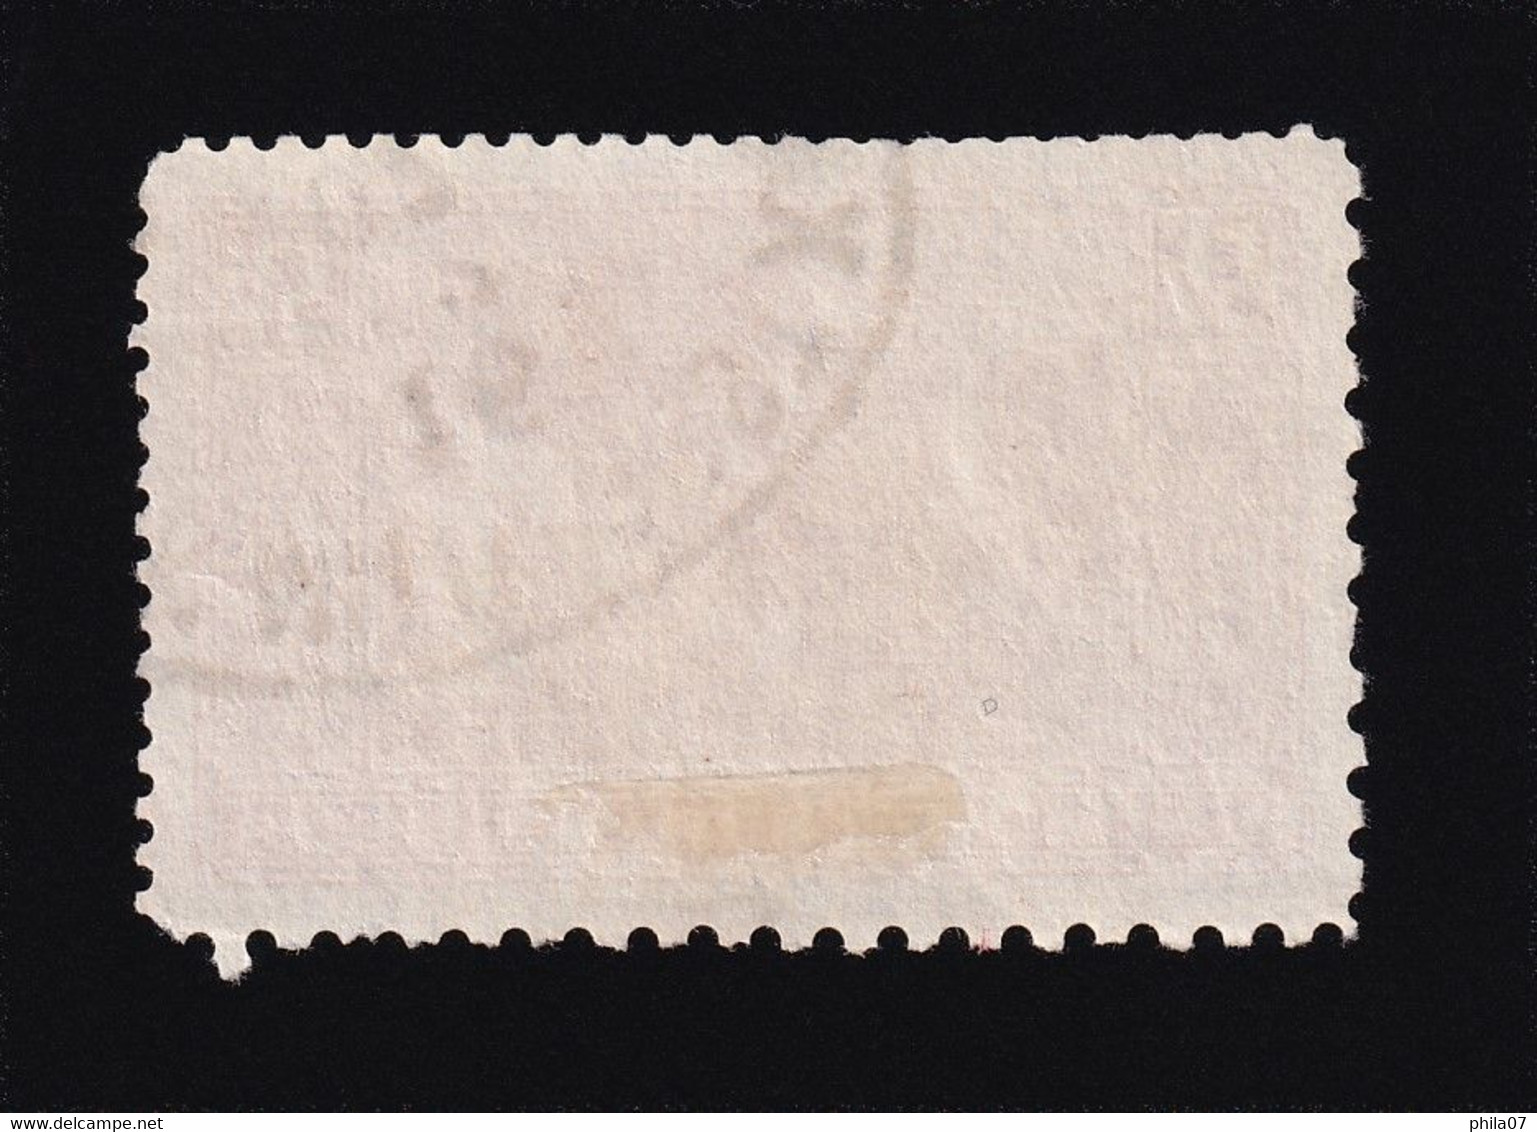 BOSNIA AND HERZEGOVINA - Landscape Stamp, 45 Hellera, With Mixed Perforation Different Position 12 ½:12½:9½:9½, Cancelle - Bosnia And Herzegovina